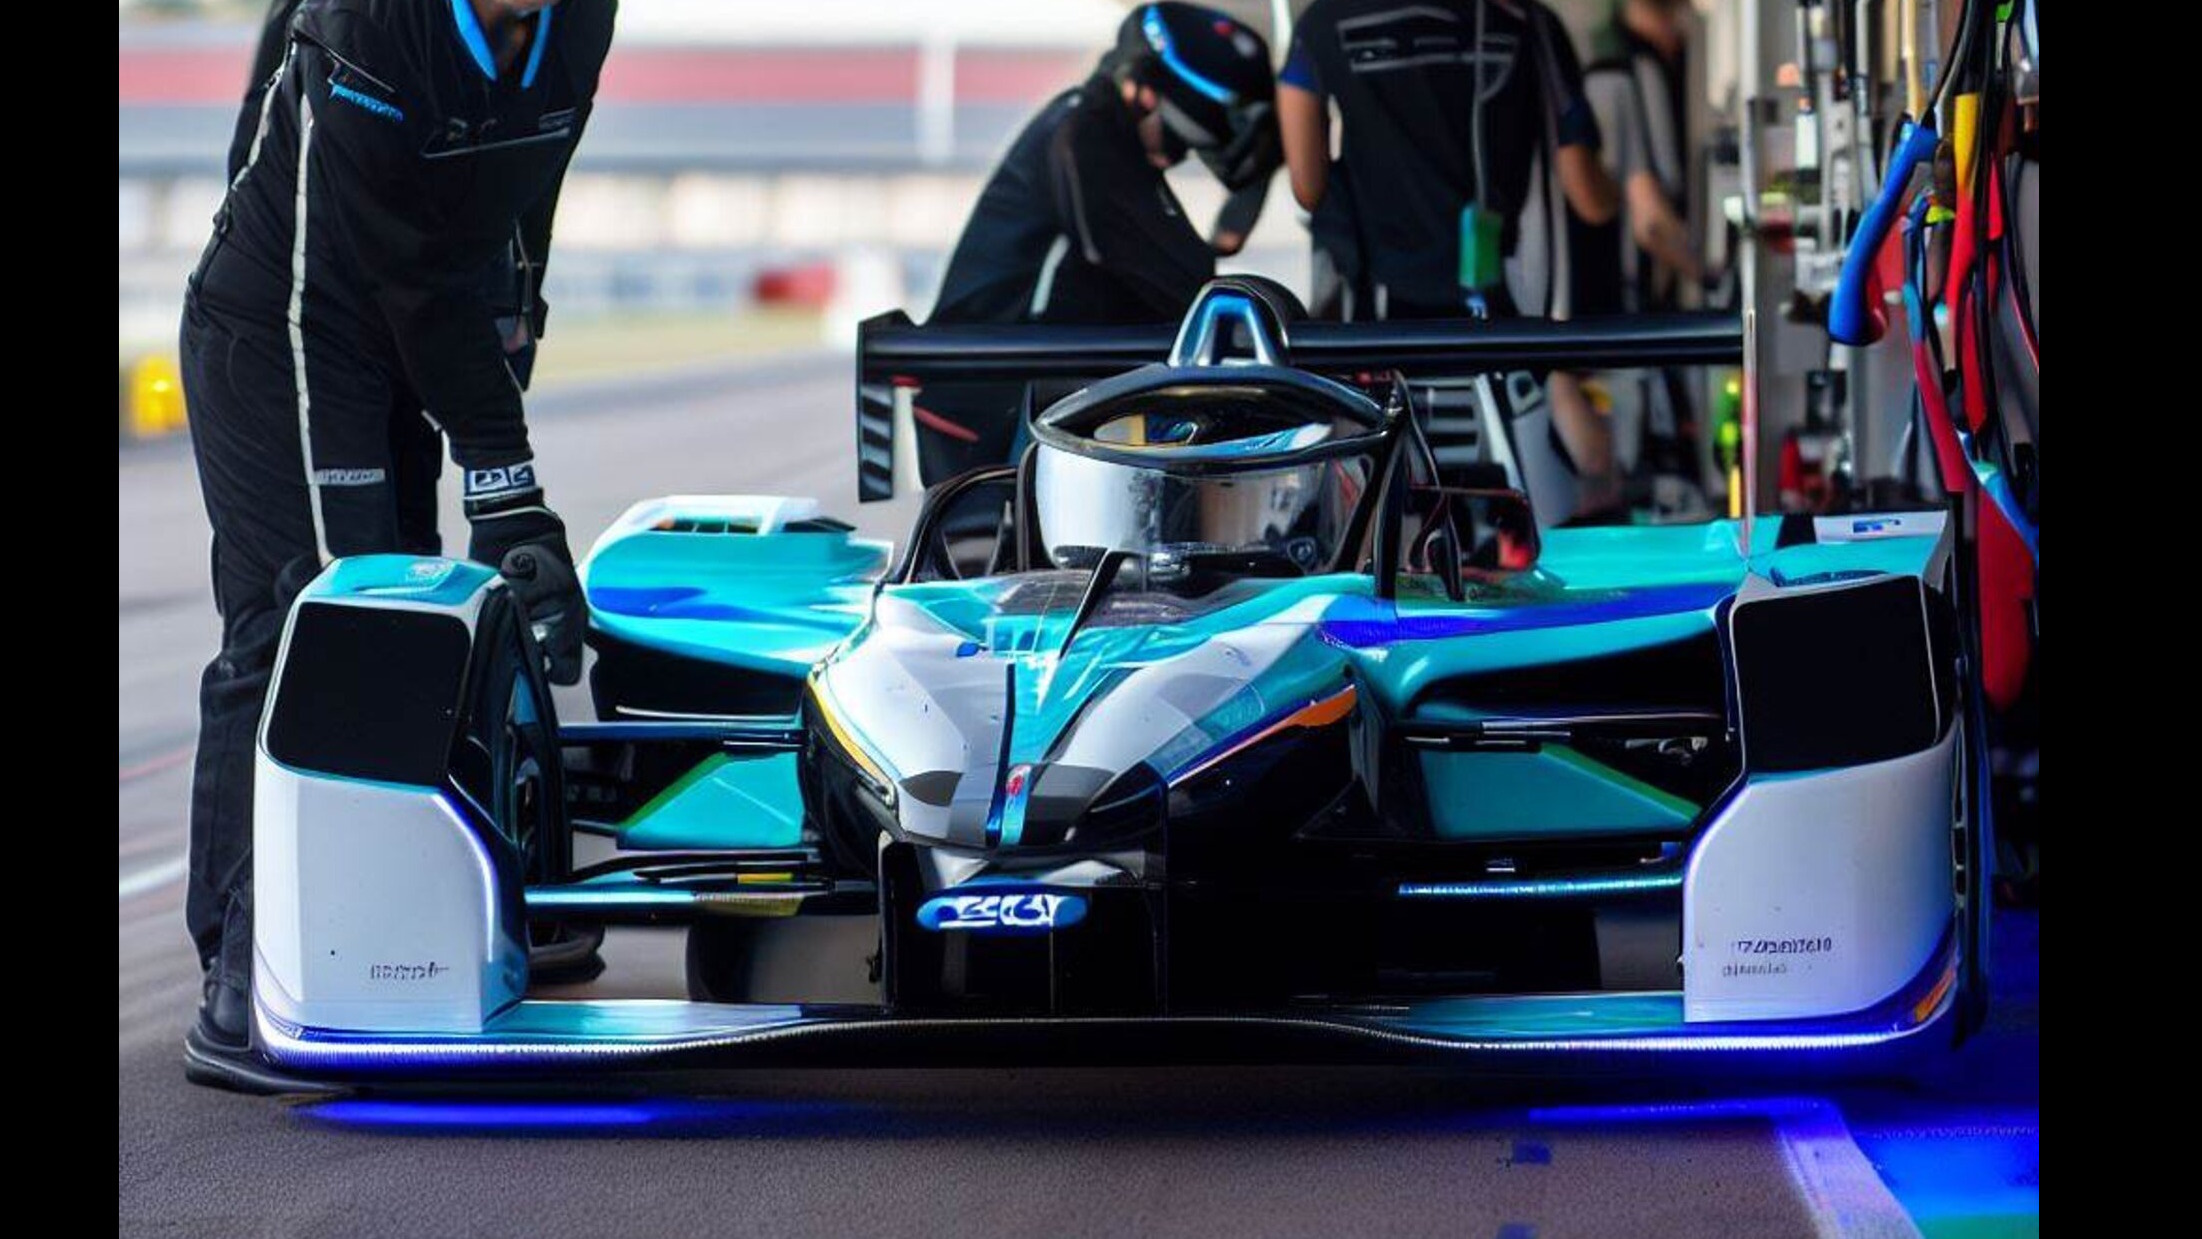 THE FASTEST ELECTRIC RACING CAR IN THE WORLD #FormulaE 